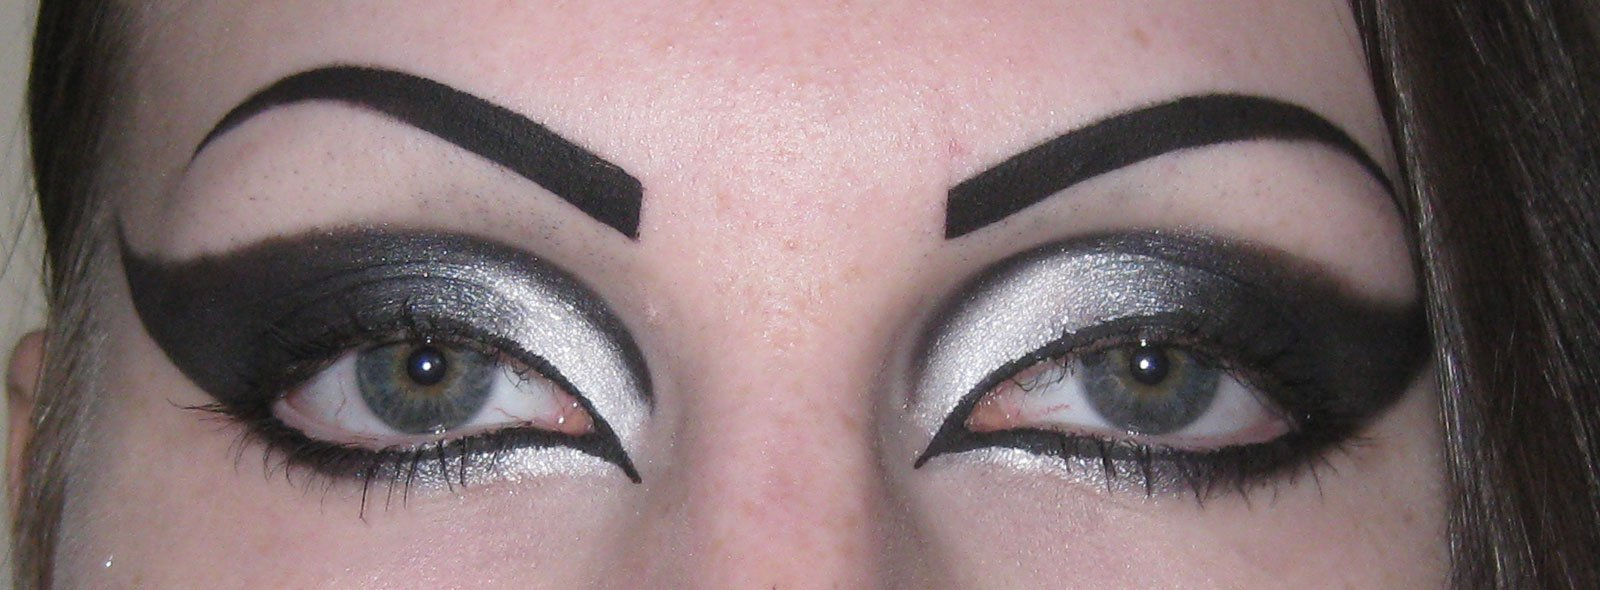 Black Cat Eye Makeup Dramatic Gothic White To Black Extended Winged Cat Eye Makeup